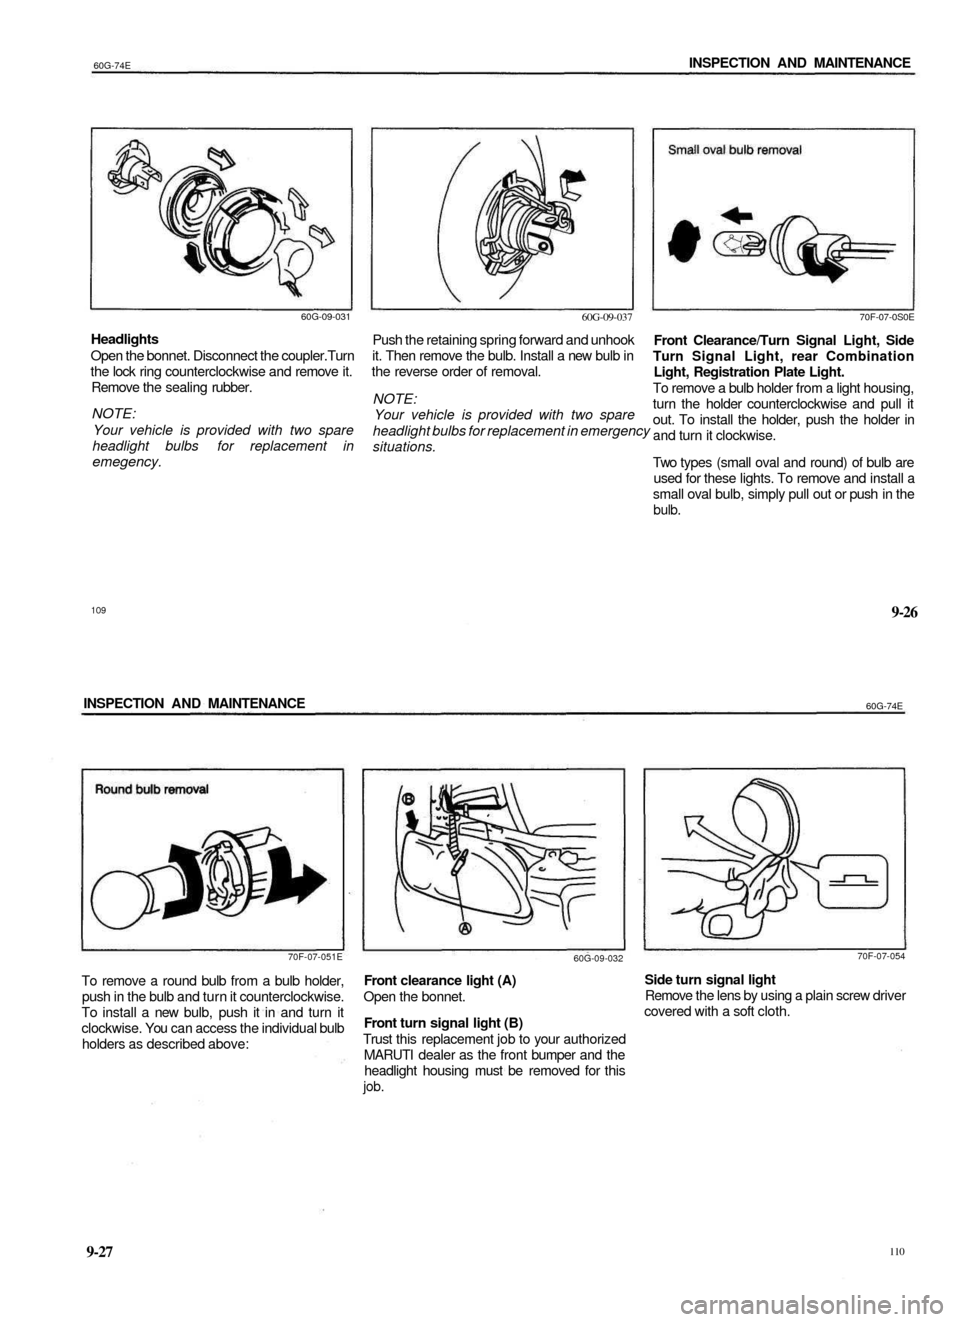 SUZUKI BALENO 1999 1.G Workshop Manual 
60G-74E 
INSPECTION AND MAINTENANCE

60G-09-031

Headlights

Open the bonnet. Disconnect the coupler.Turn

the lock ring counterclockwise and remove it.

Remove the sealing rubber.

NOTE:

Your vehic